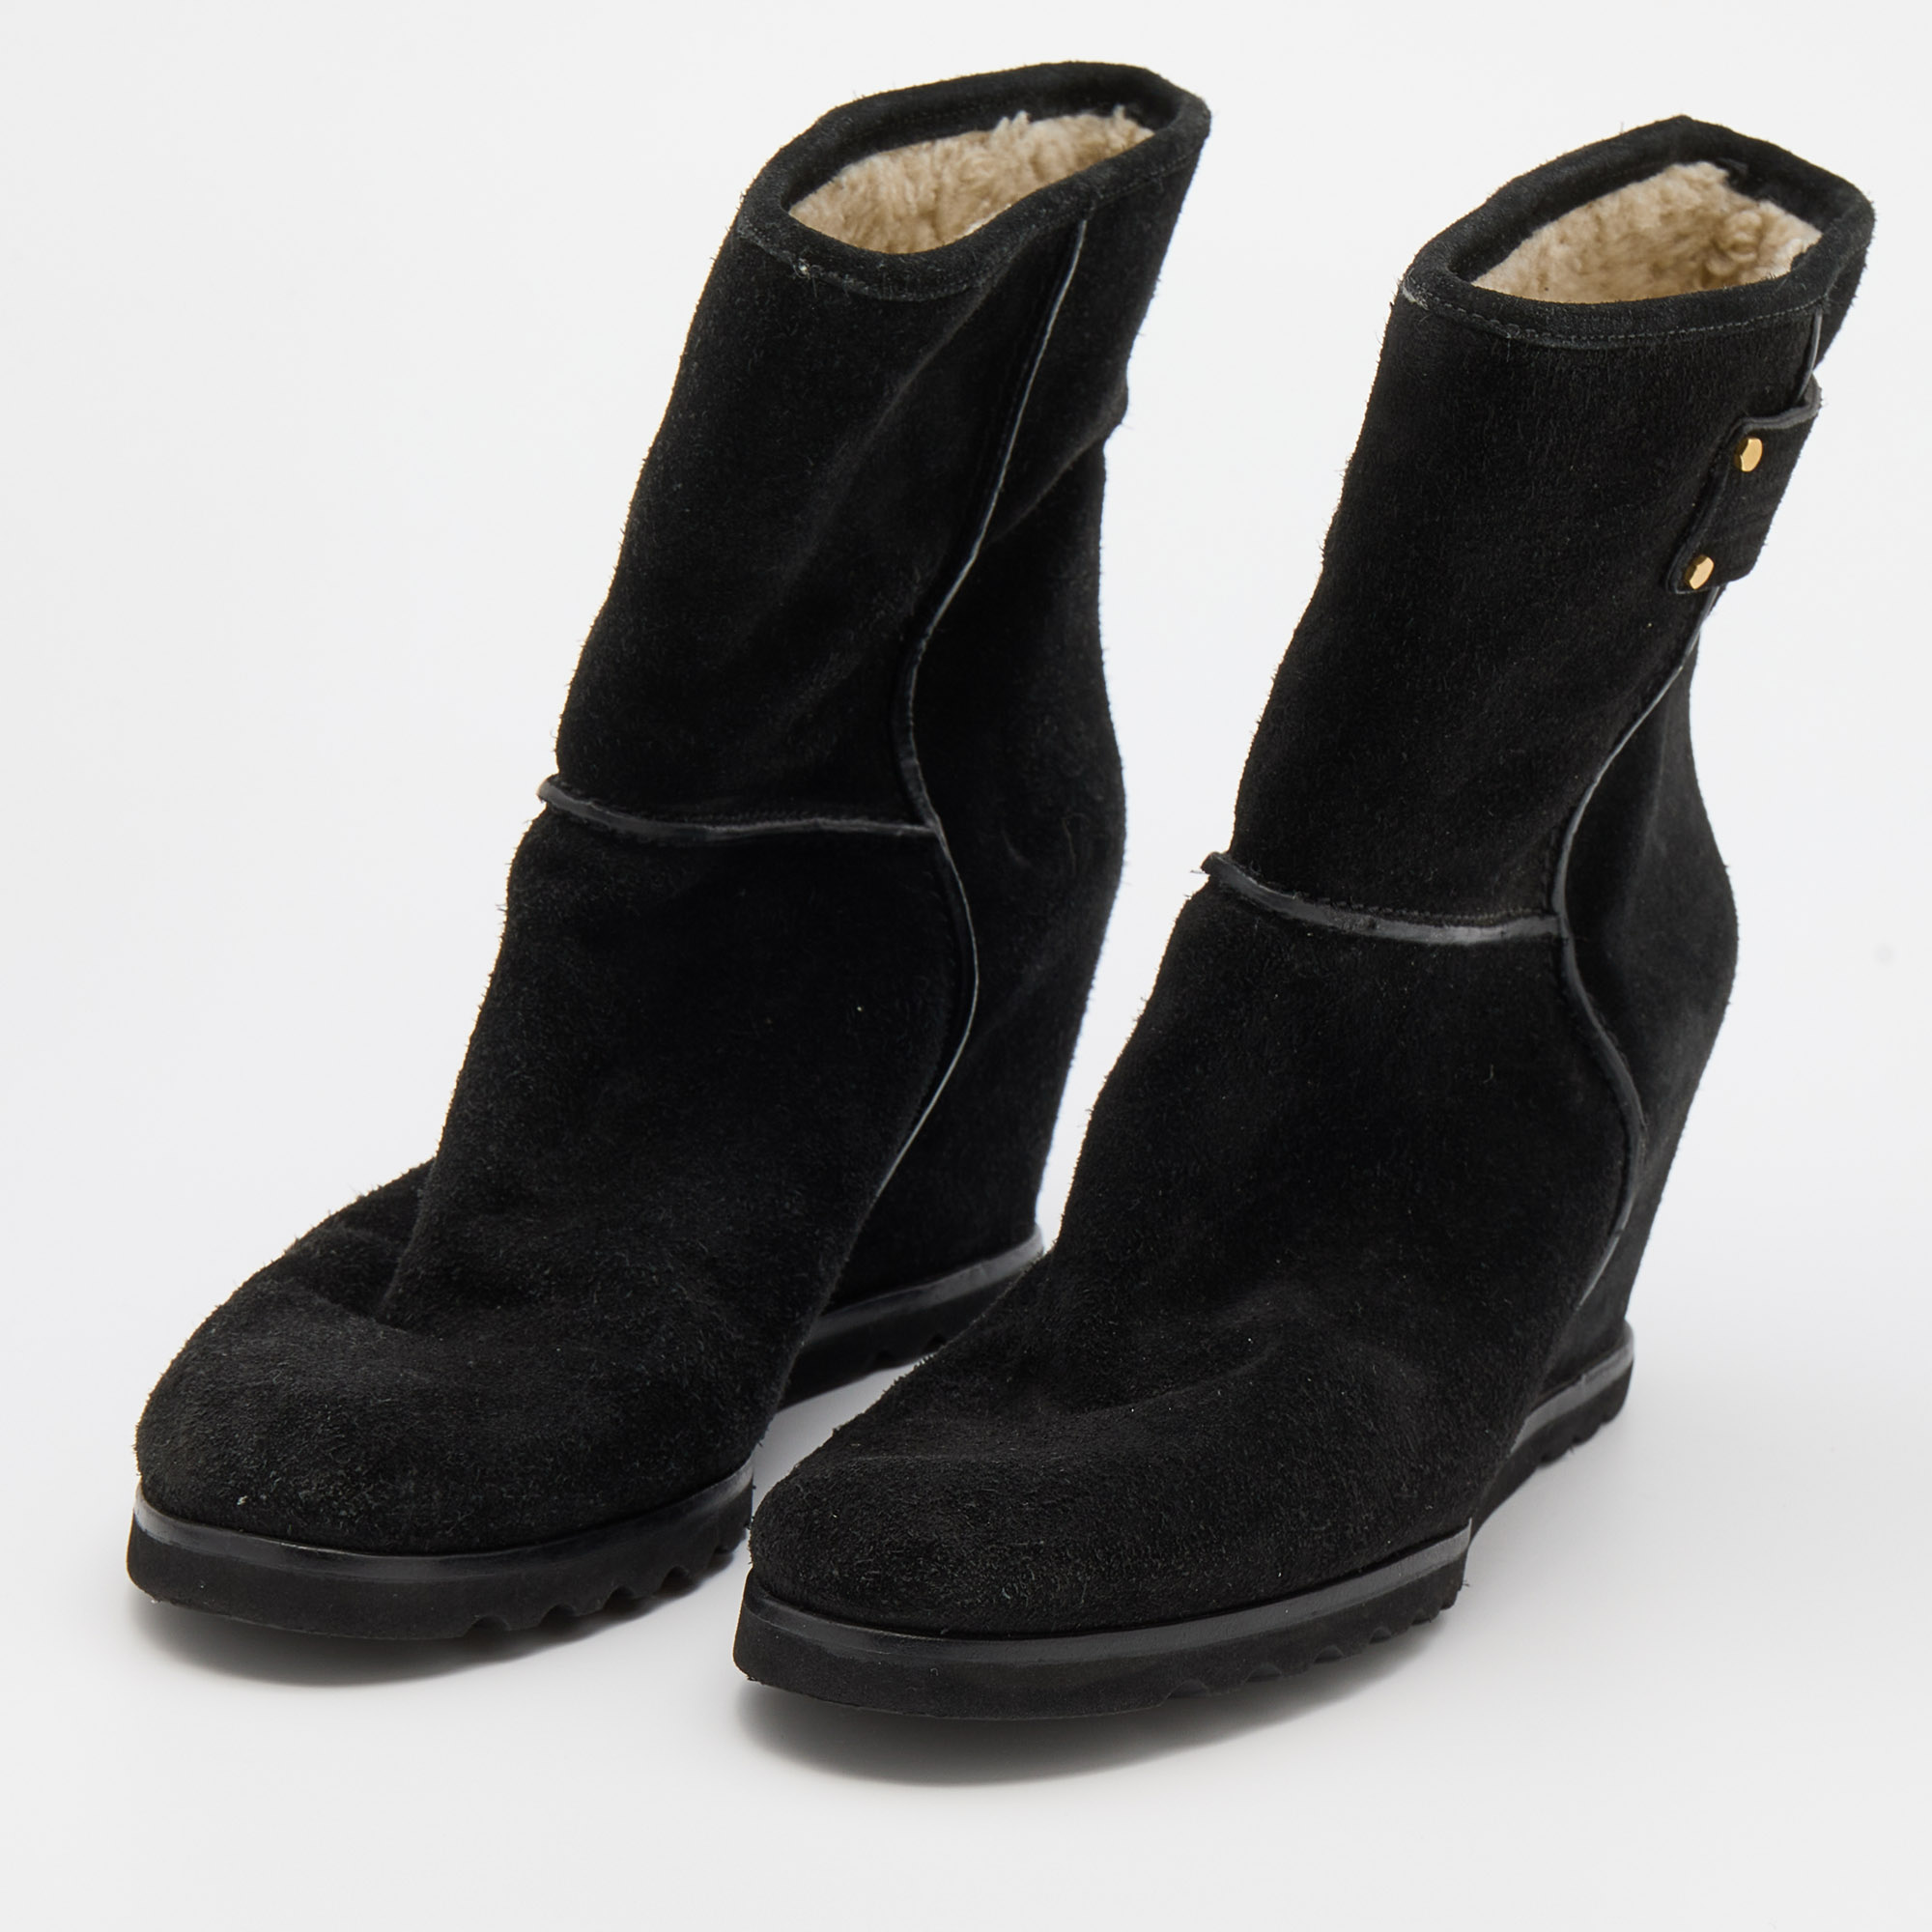 

Marc By Marc Jacobs Black Suede Wedge Ankle Length Boots Size